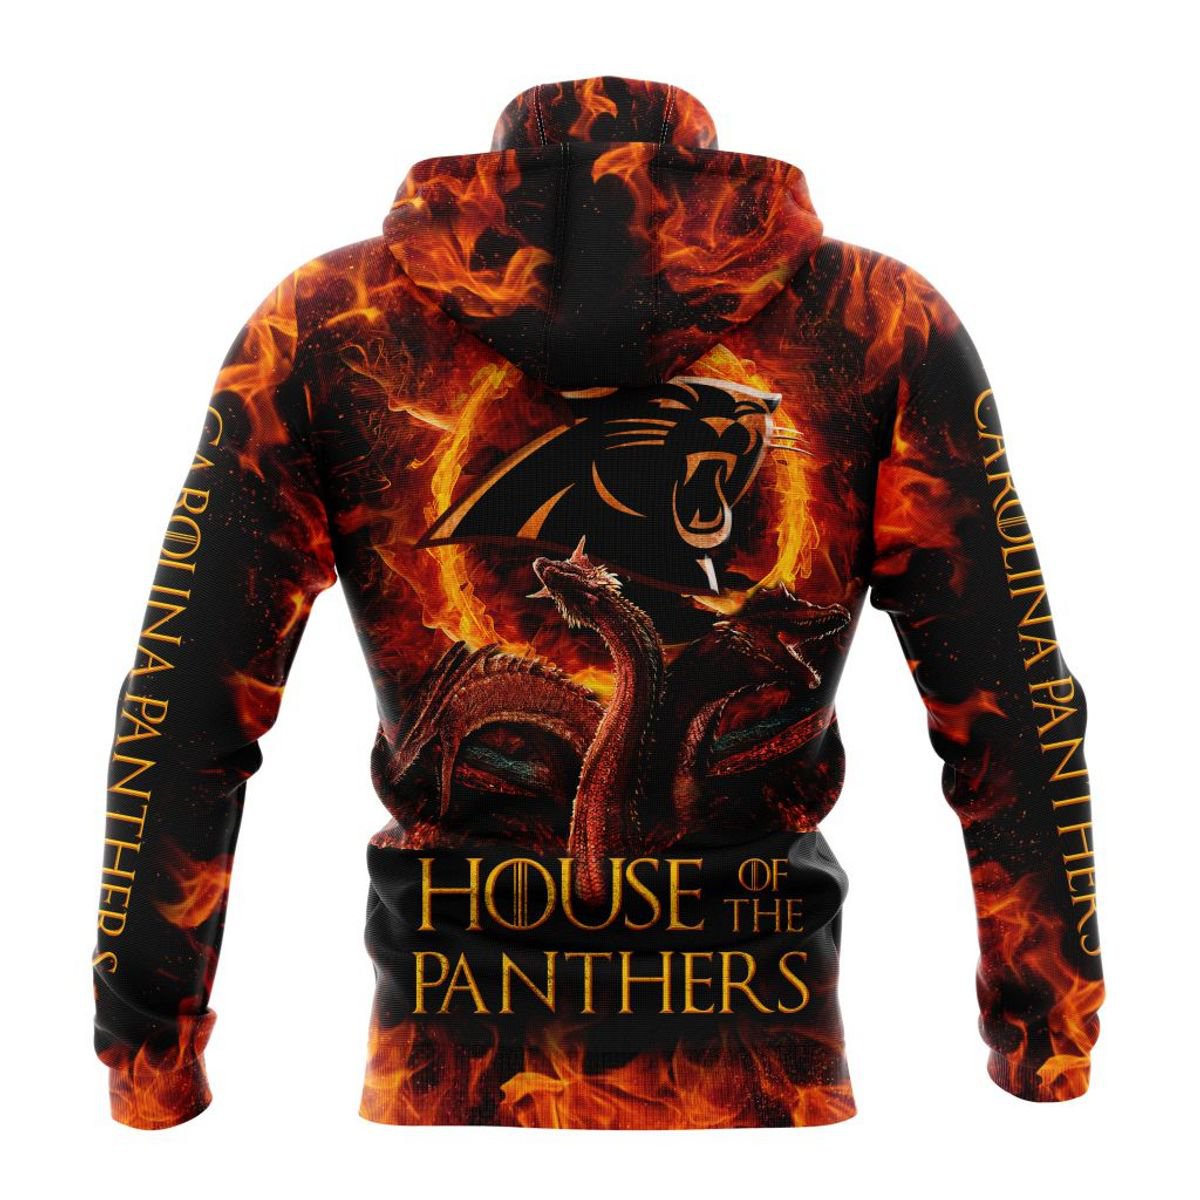 CAROLINA PANTHERS GAME OF THRONES – HOUSE OF THE PANTHERS 3D HOODIE